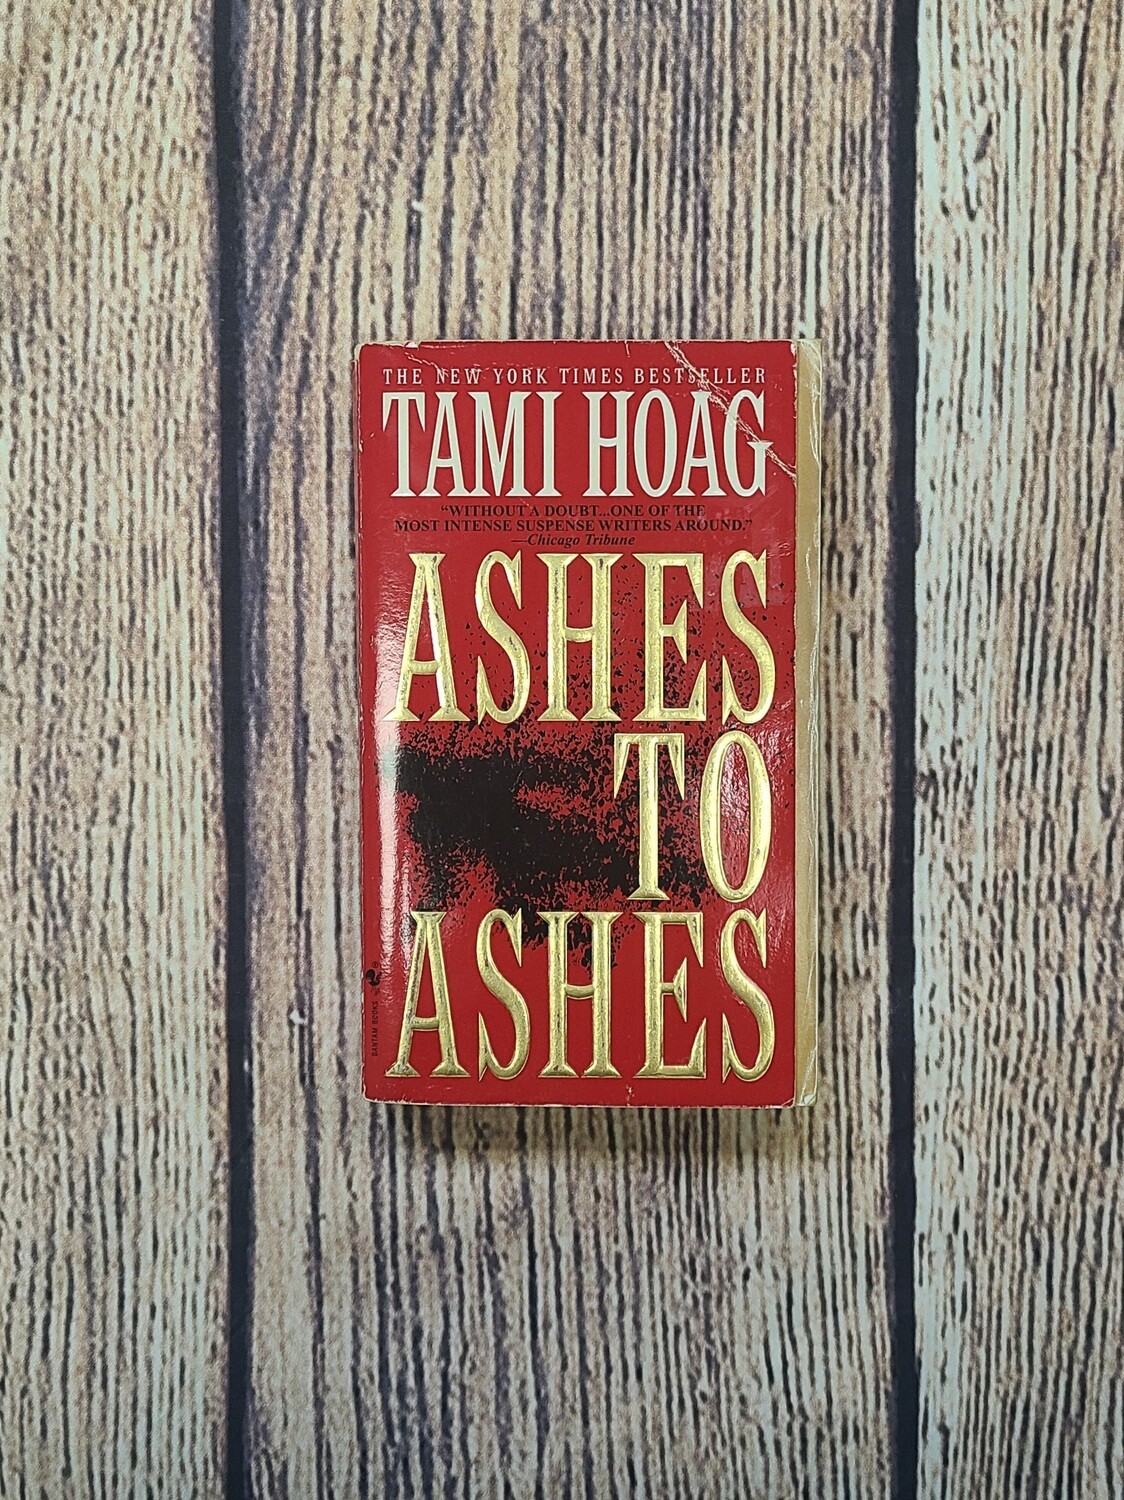 Ashes to Ashes by Tami Hoag